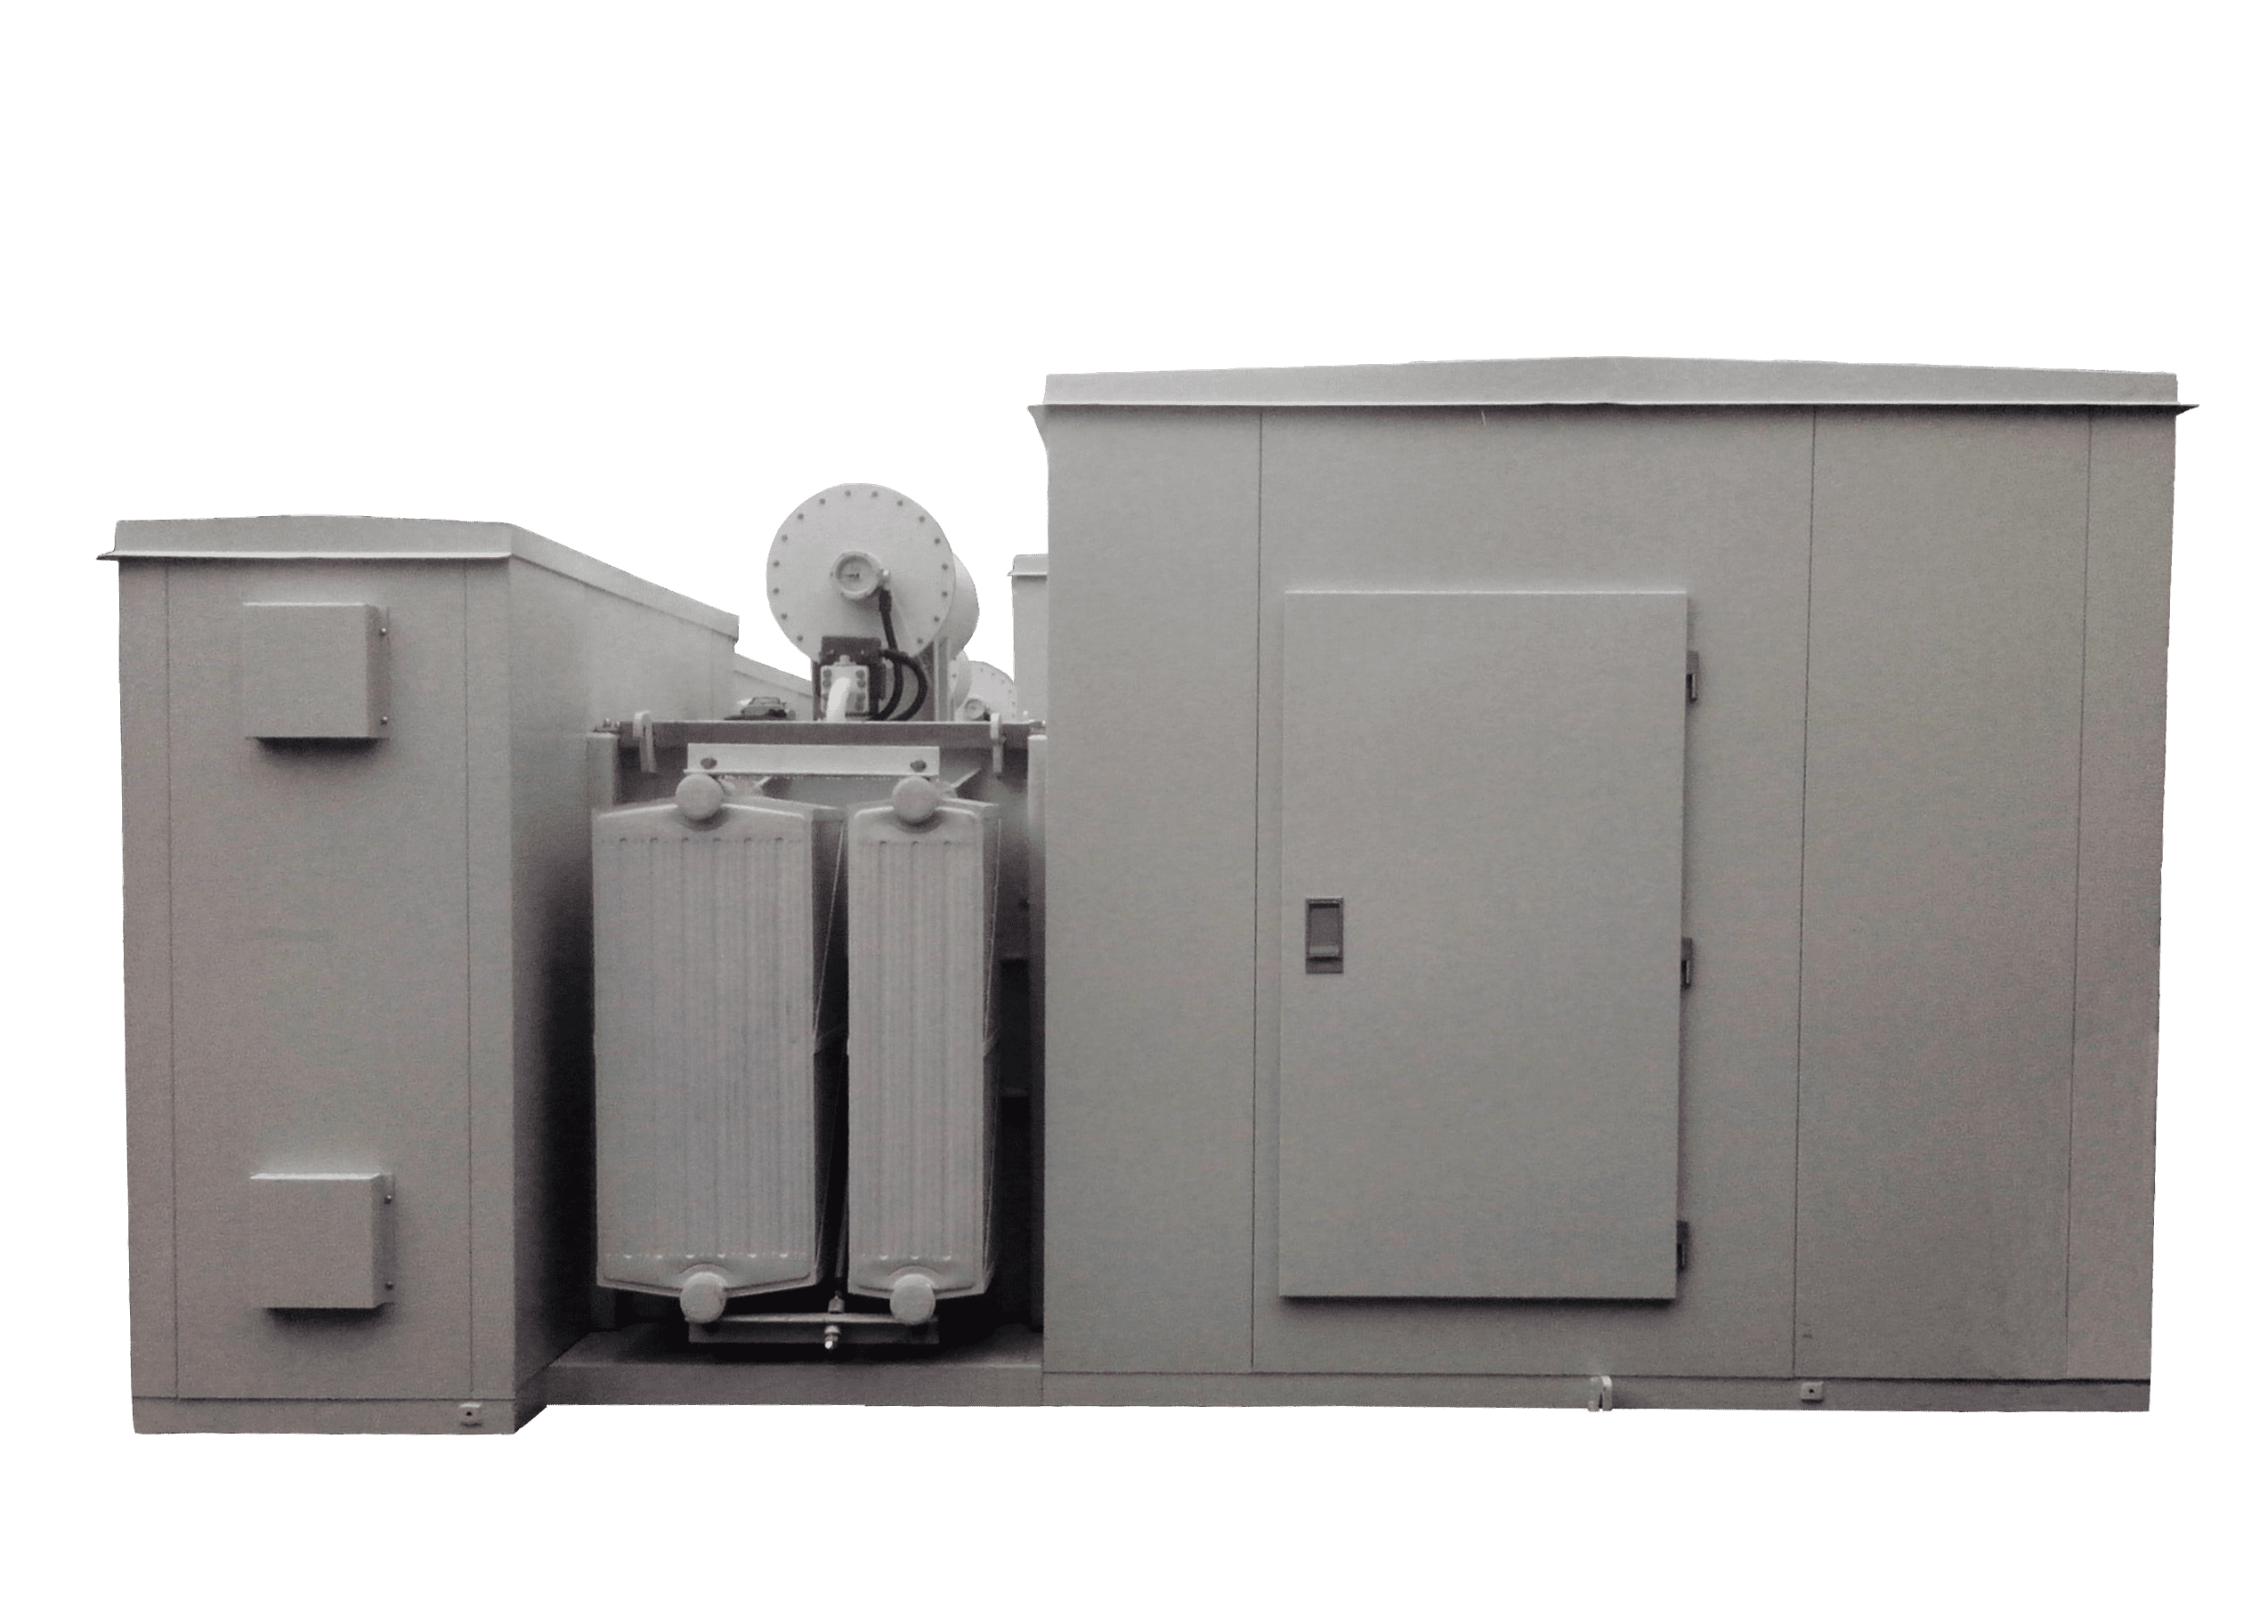 Pre-fabricated Substation for Photovoltaic/Wind Power Generation